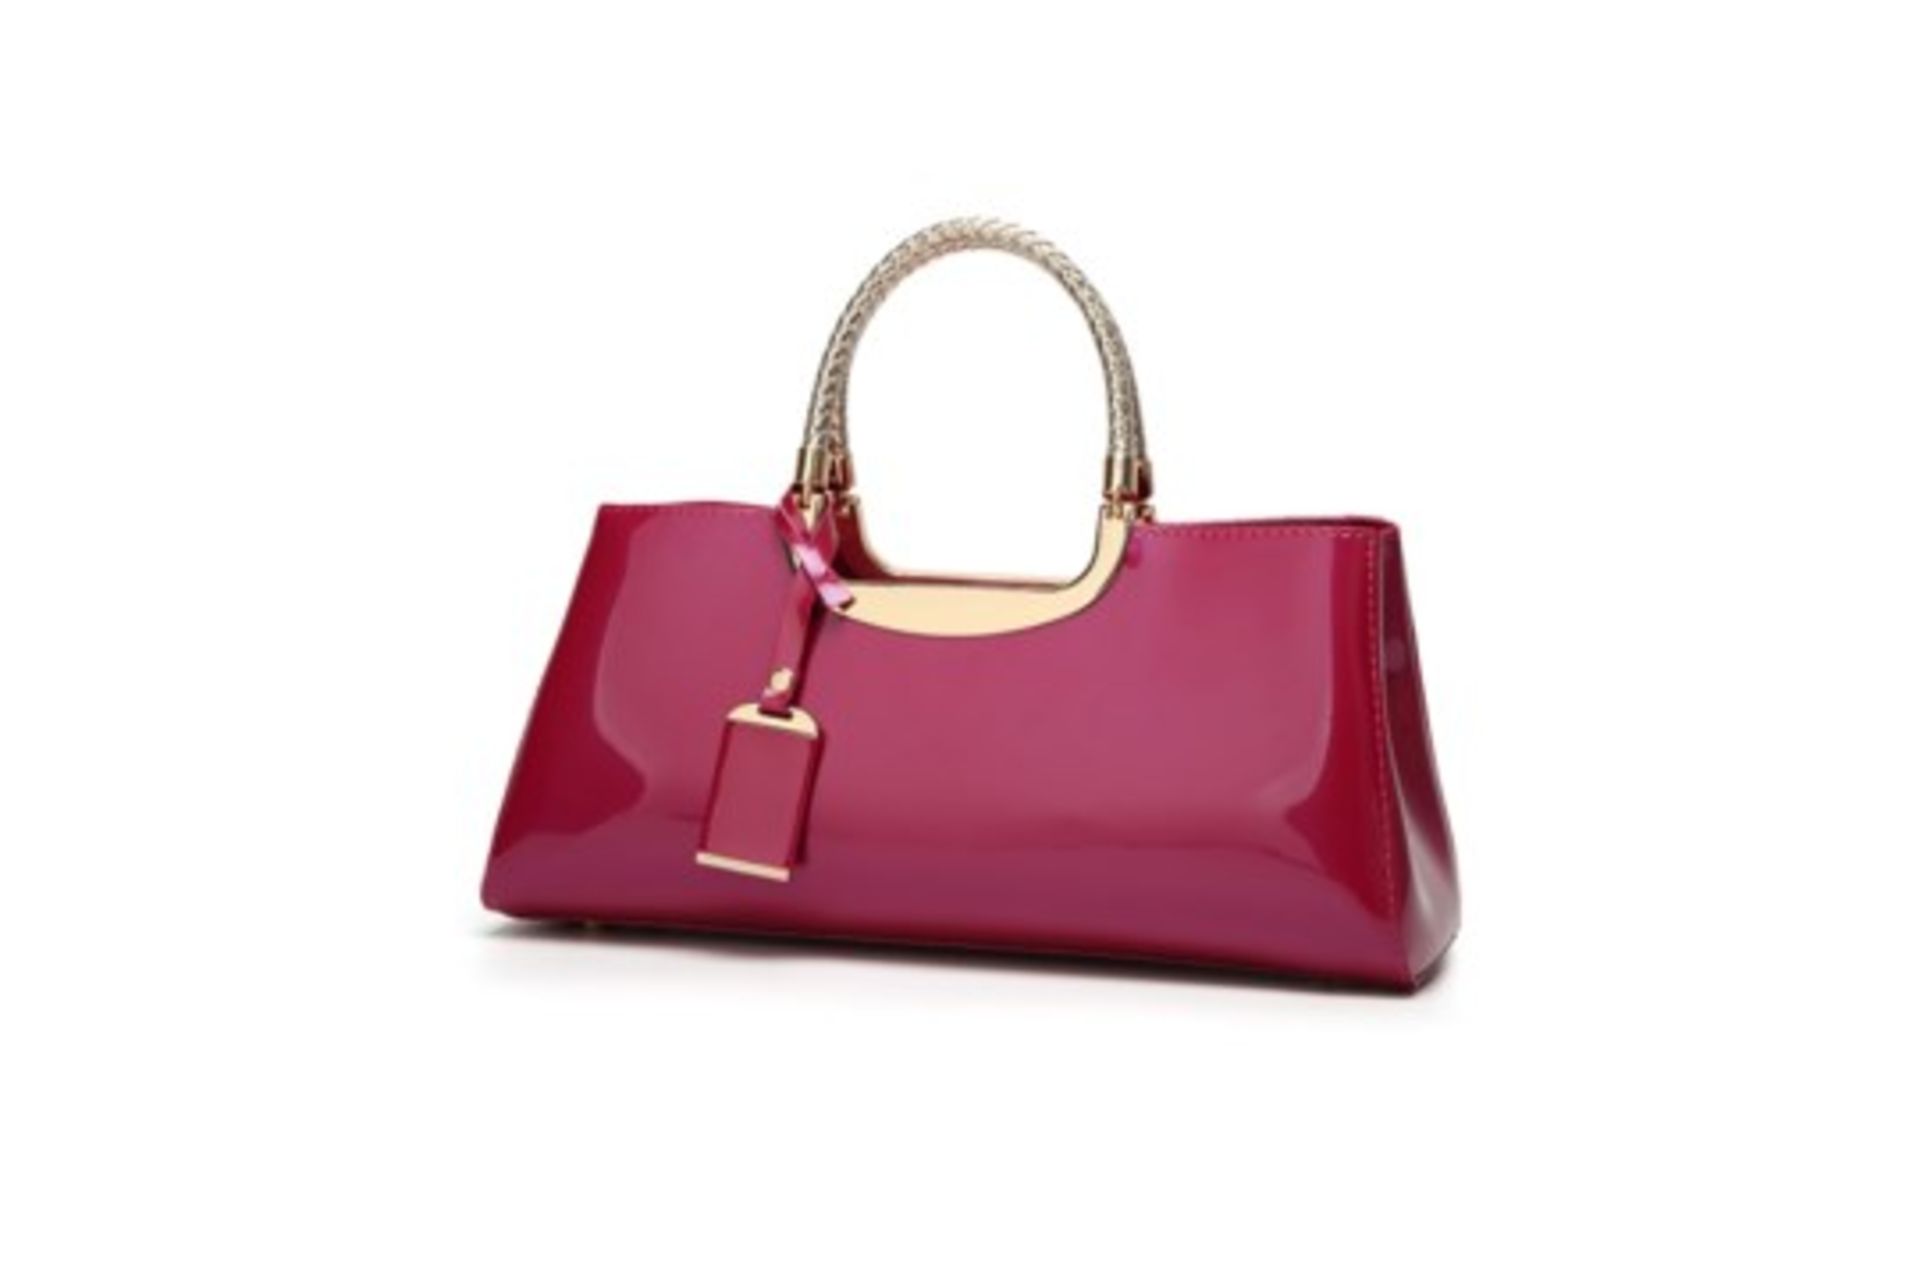 Brand New Womens Coolives Light Golden Strap Party Bag in Wine Red RRP £54.99